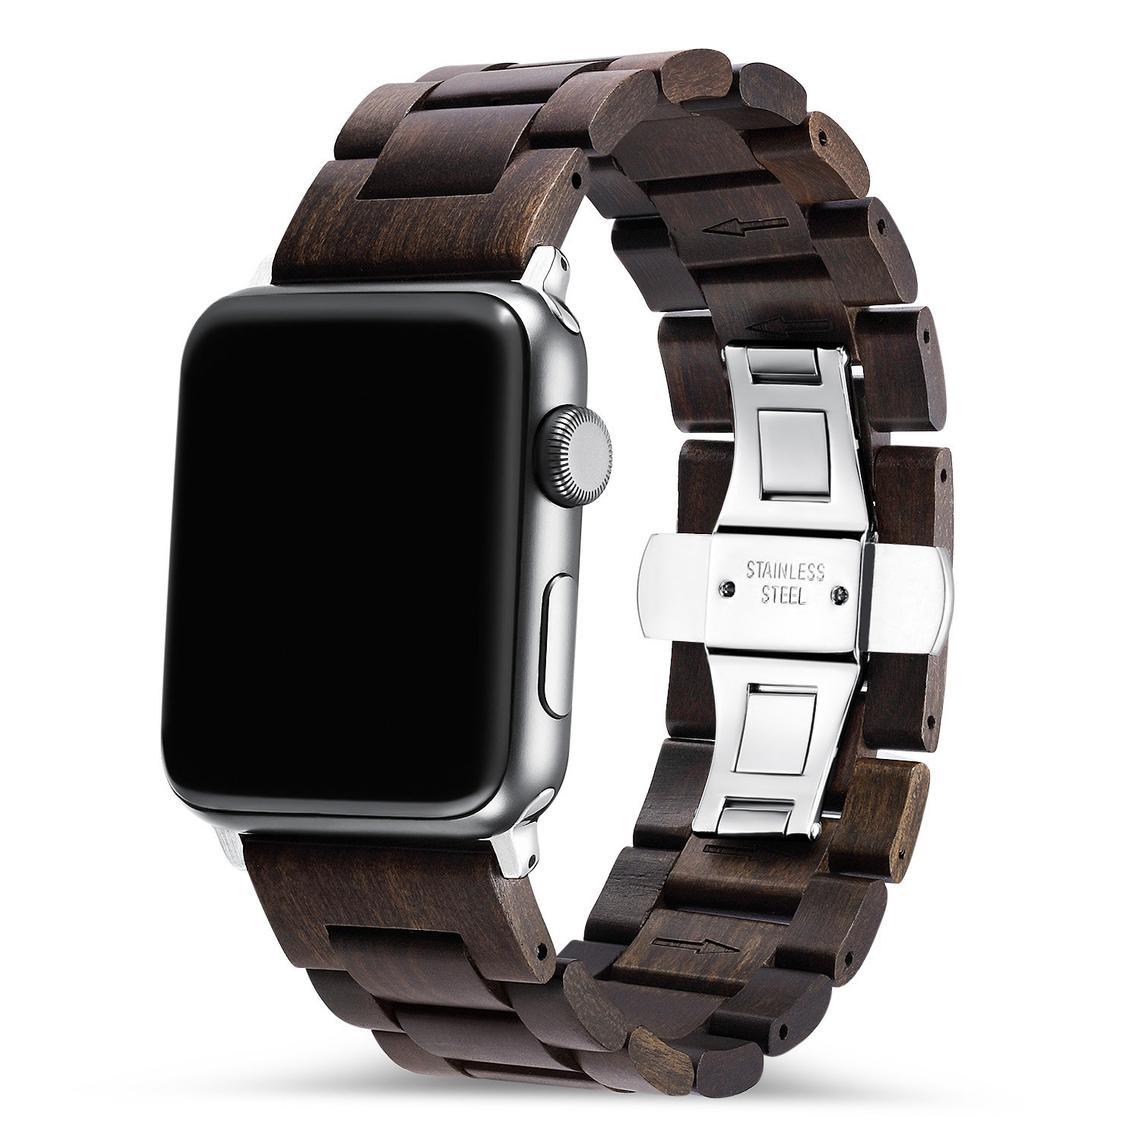 Ebony Apple Watch Wooden Band 🌳 Natural Wood. ♻️ Eco-friendly. ✈️ Free Worldwide Shipping. 🎁 Perfect Gift.